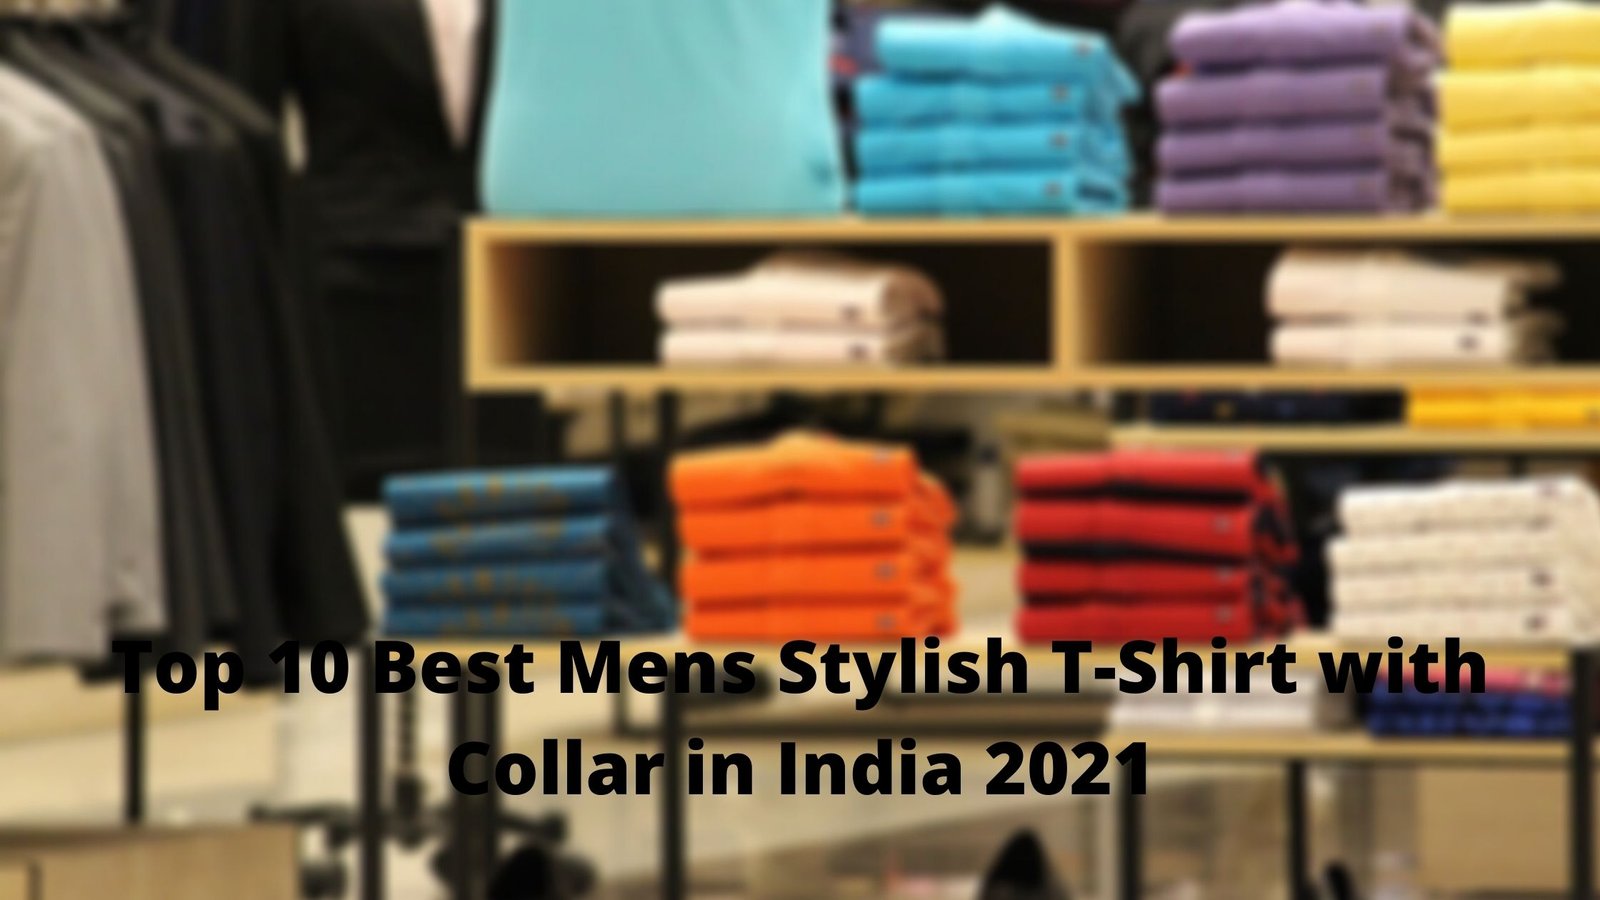 Now Top 10 Best Mens T-Shirt with Collar in India